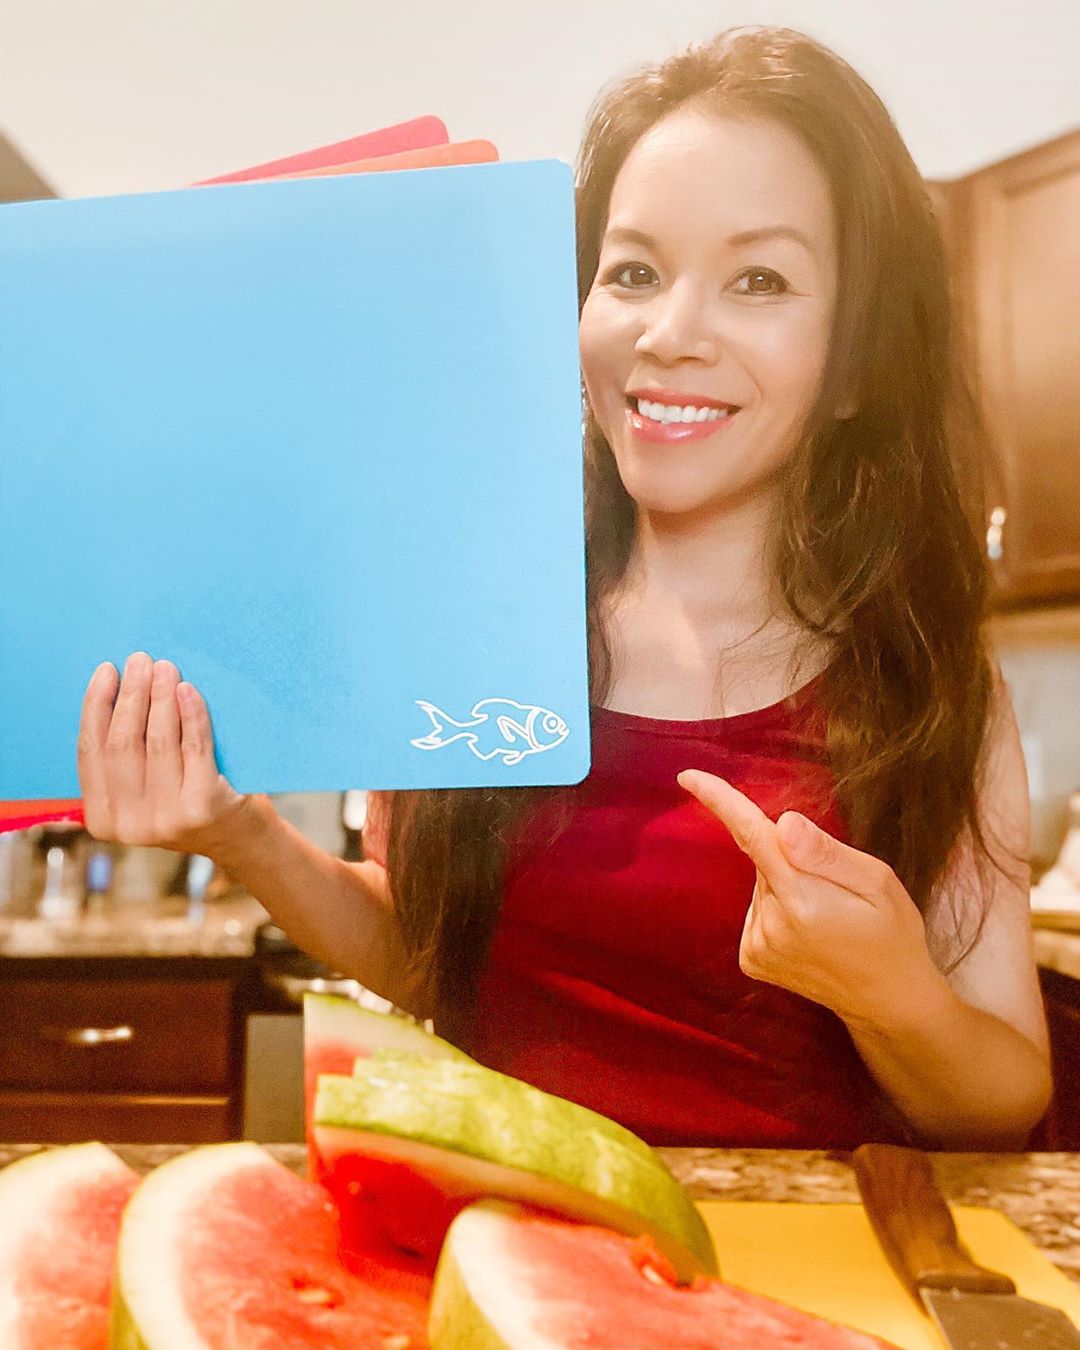 Zulay Cutting Mats Made Cooking More At Ease Says Kristi Blanc! - Zulay Kitchen